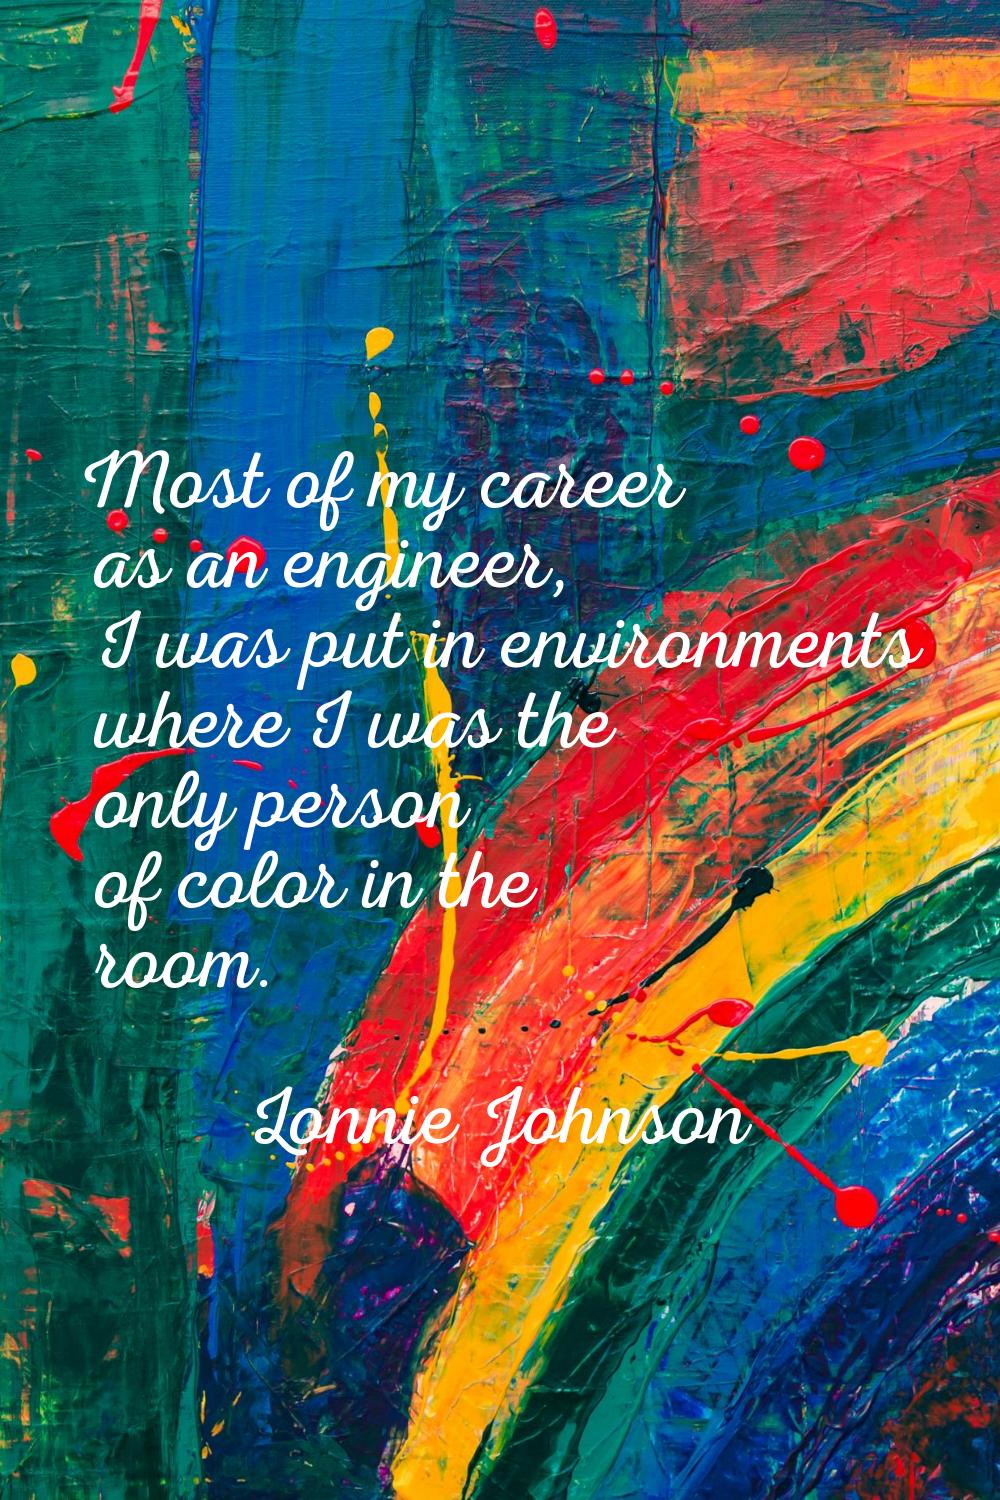 Most of my career as an engineer, I was put in environments where I was the only person of color in